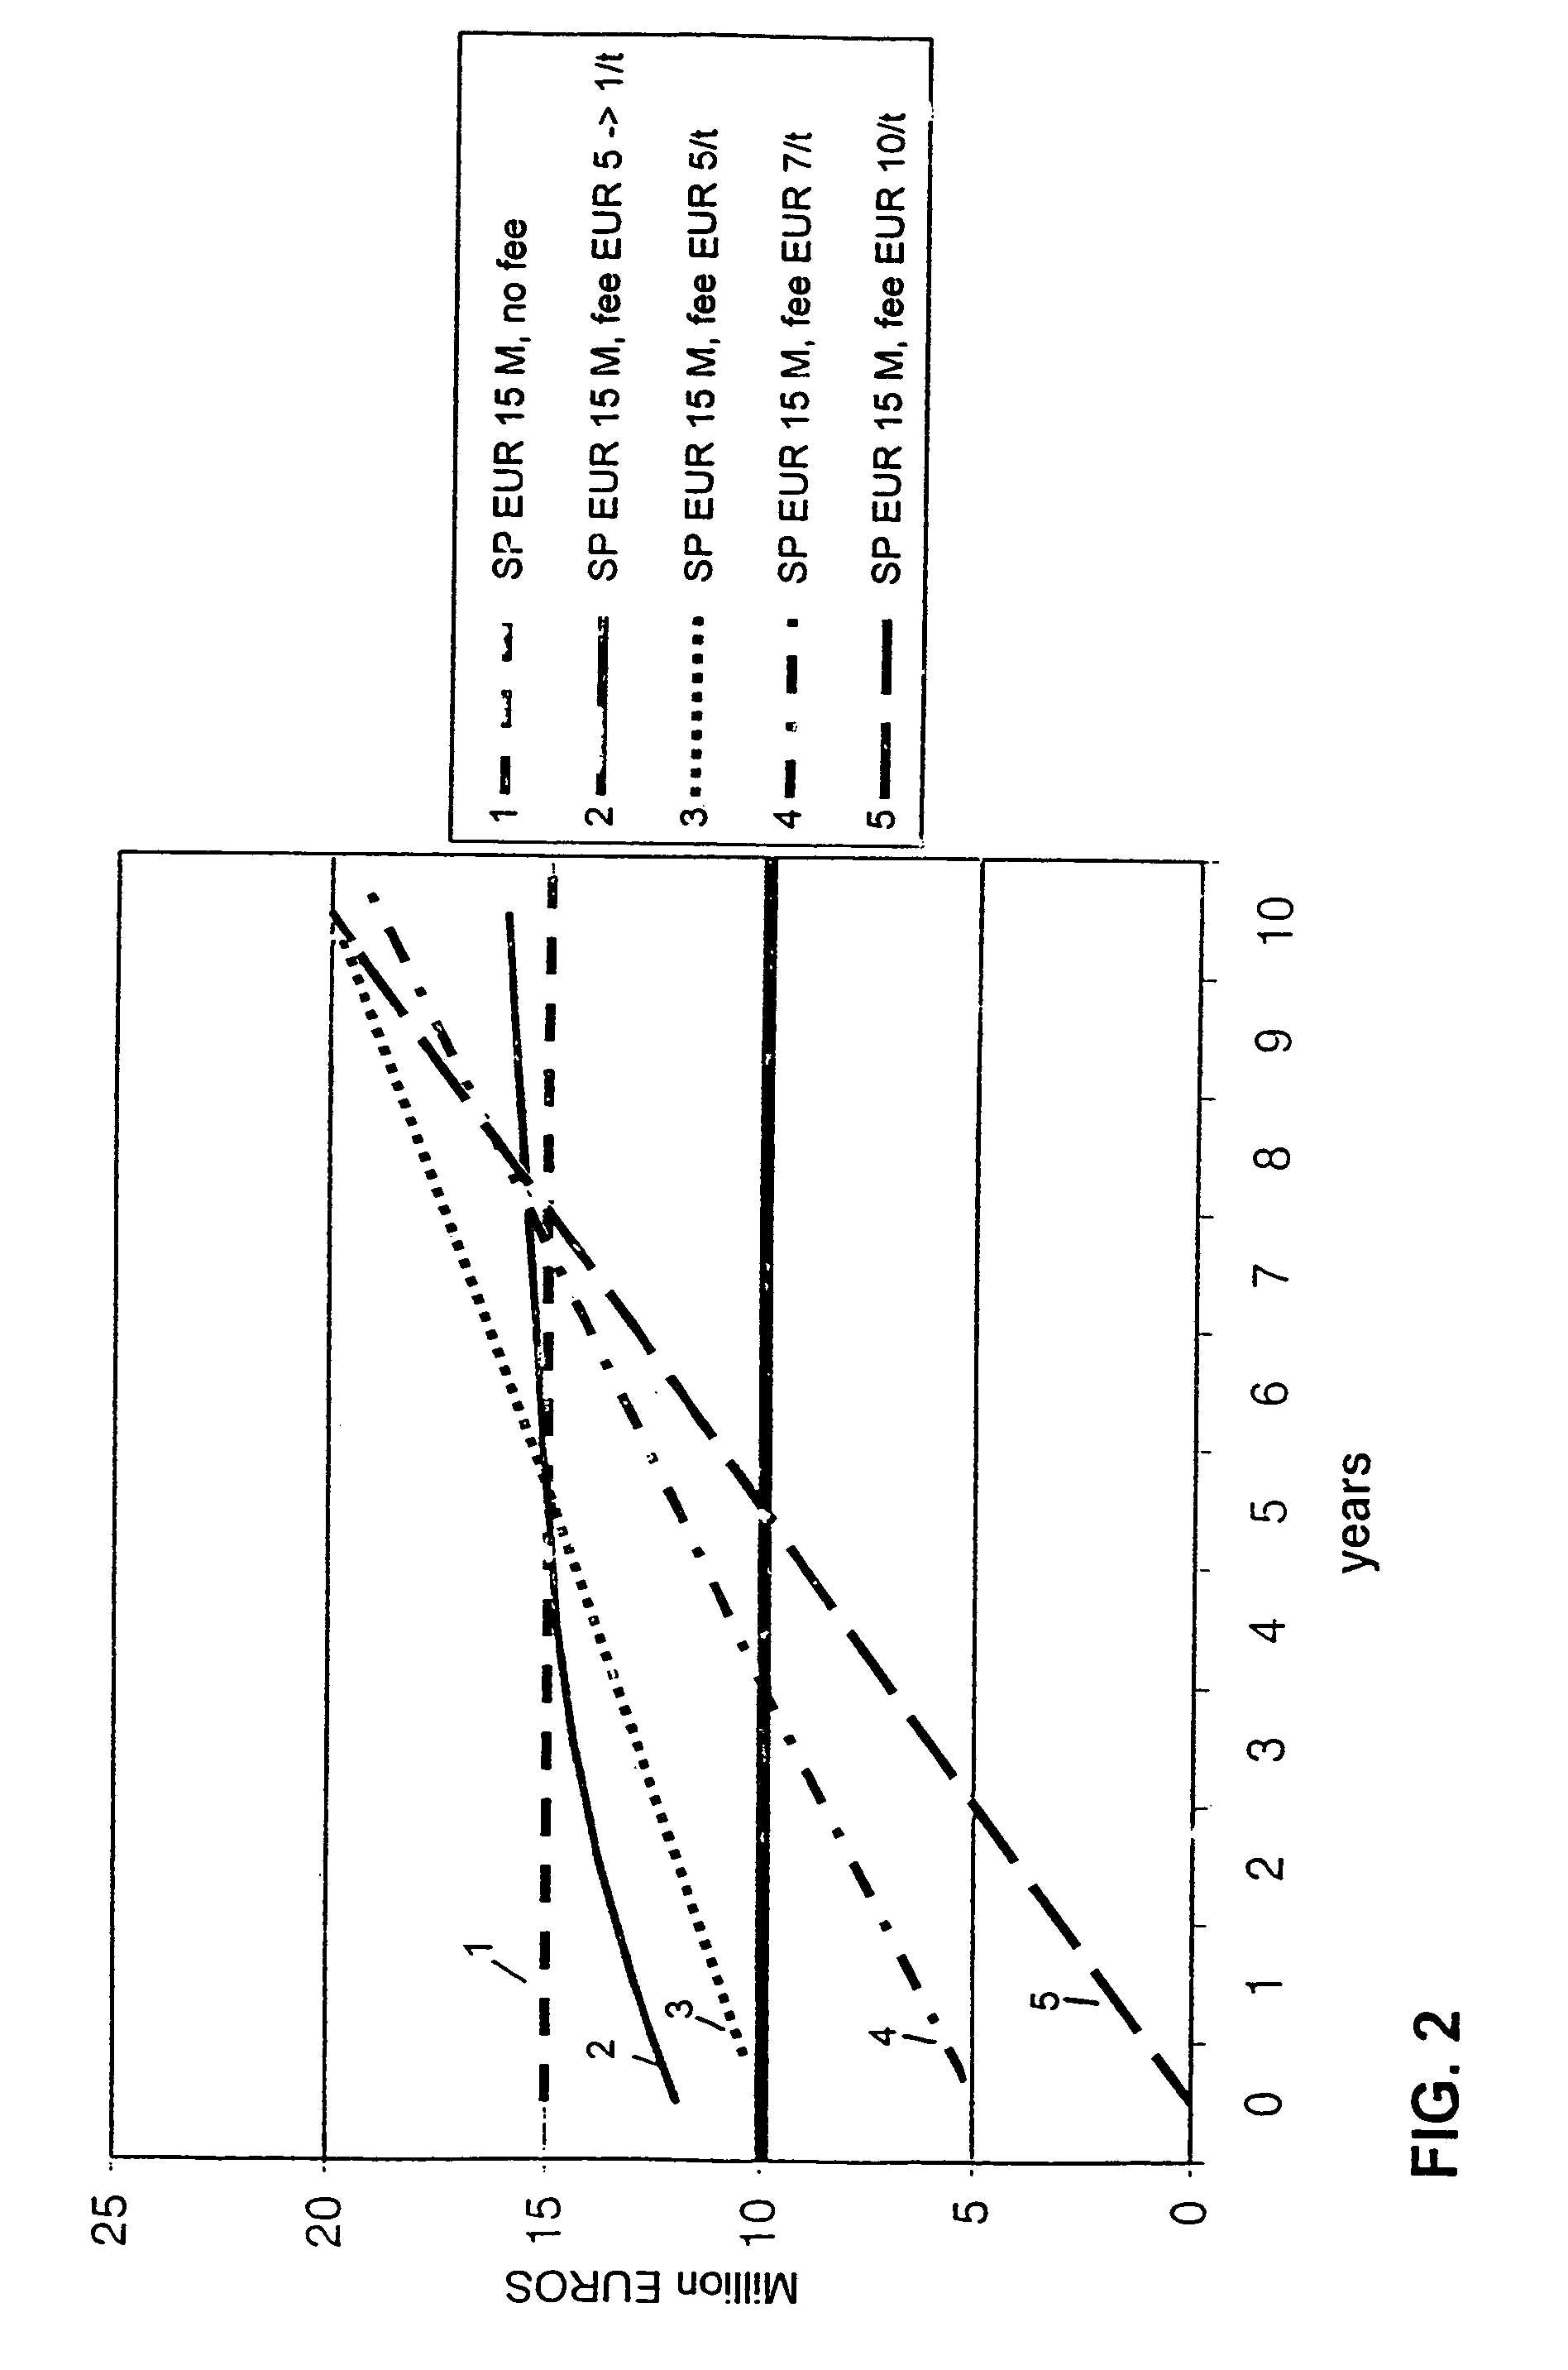 Method for selling upgrade packages in papermaking